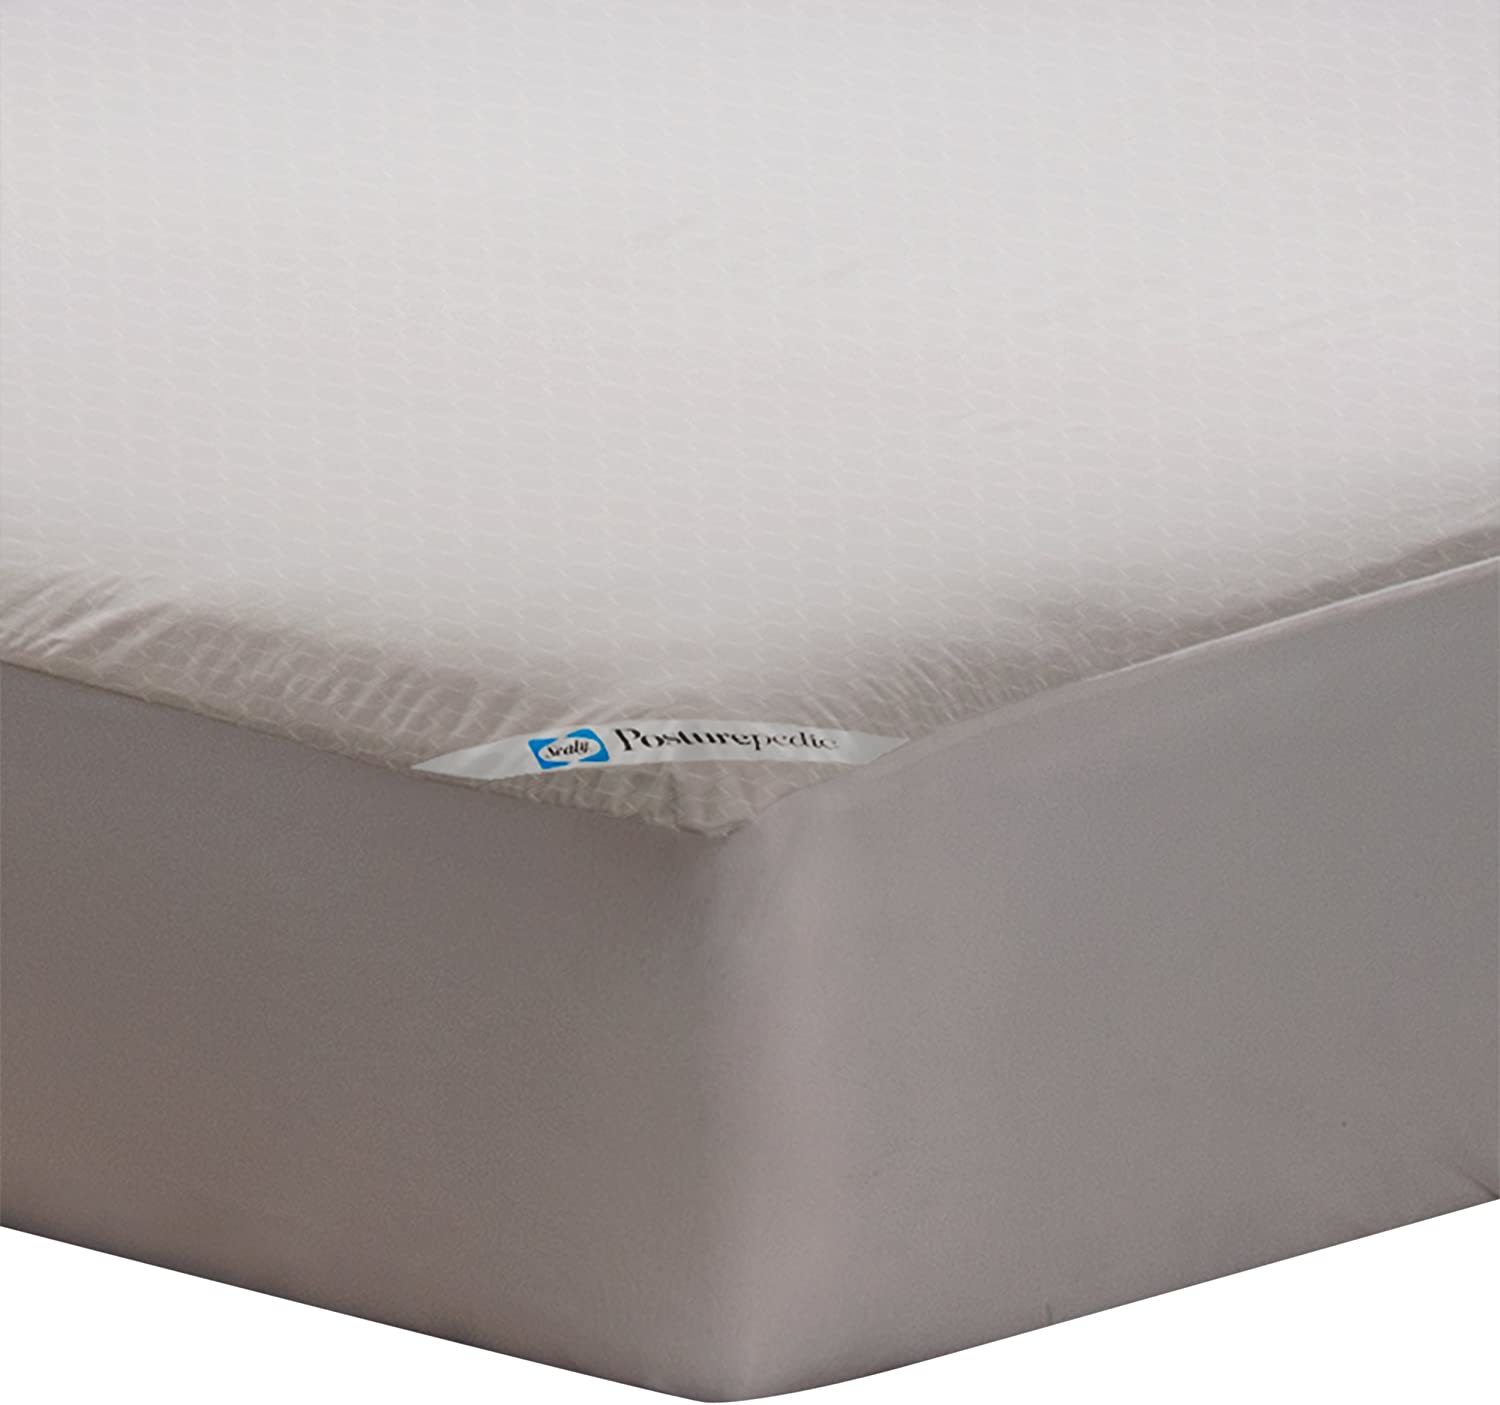 Primary image for Zippered Mattress Protector By Sealy Posturepedic Allergy Protection.